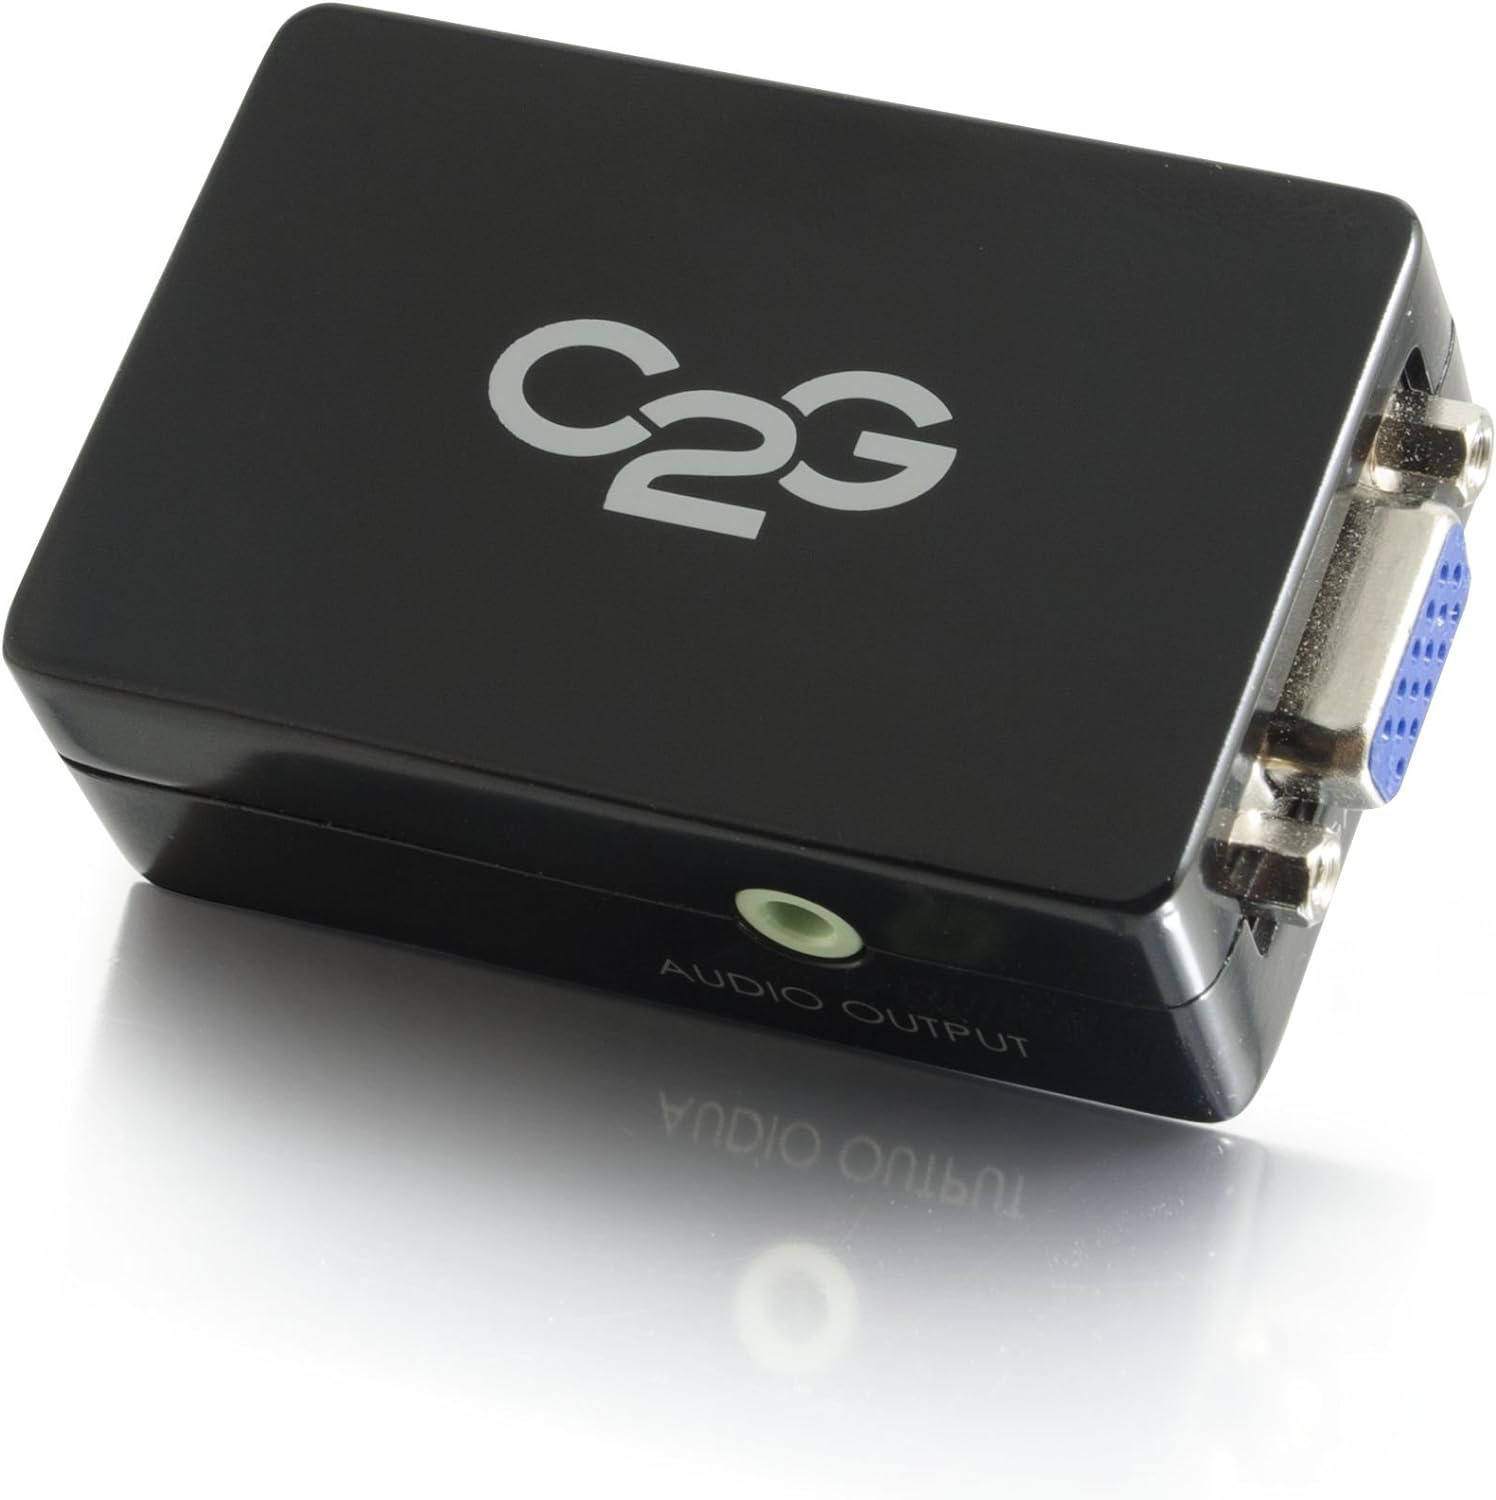 C2G / Cables to Go 40714 Pro HDMI to VGA Converter